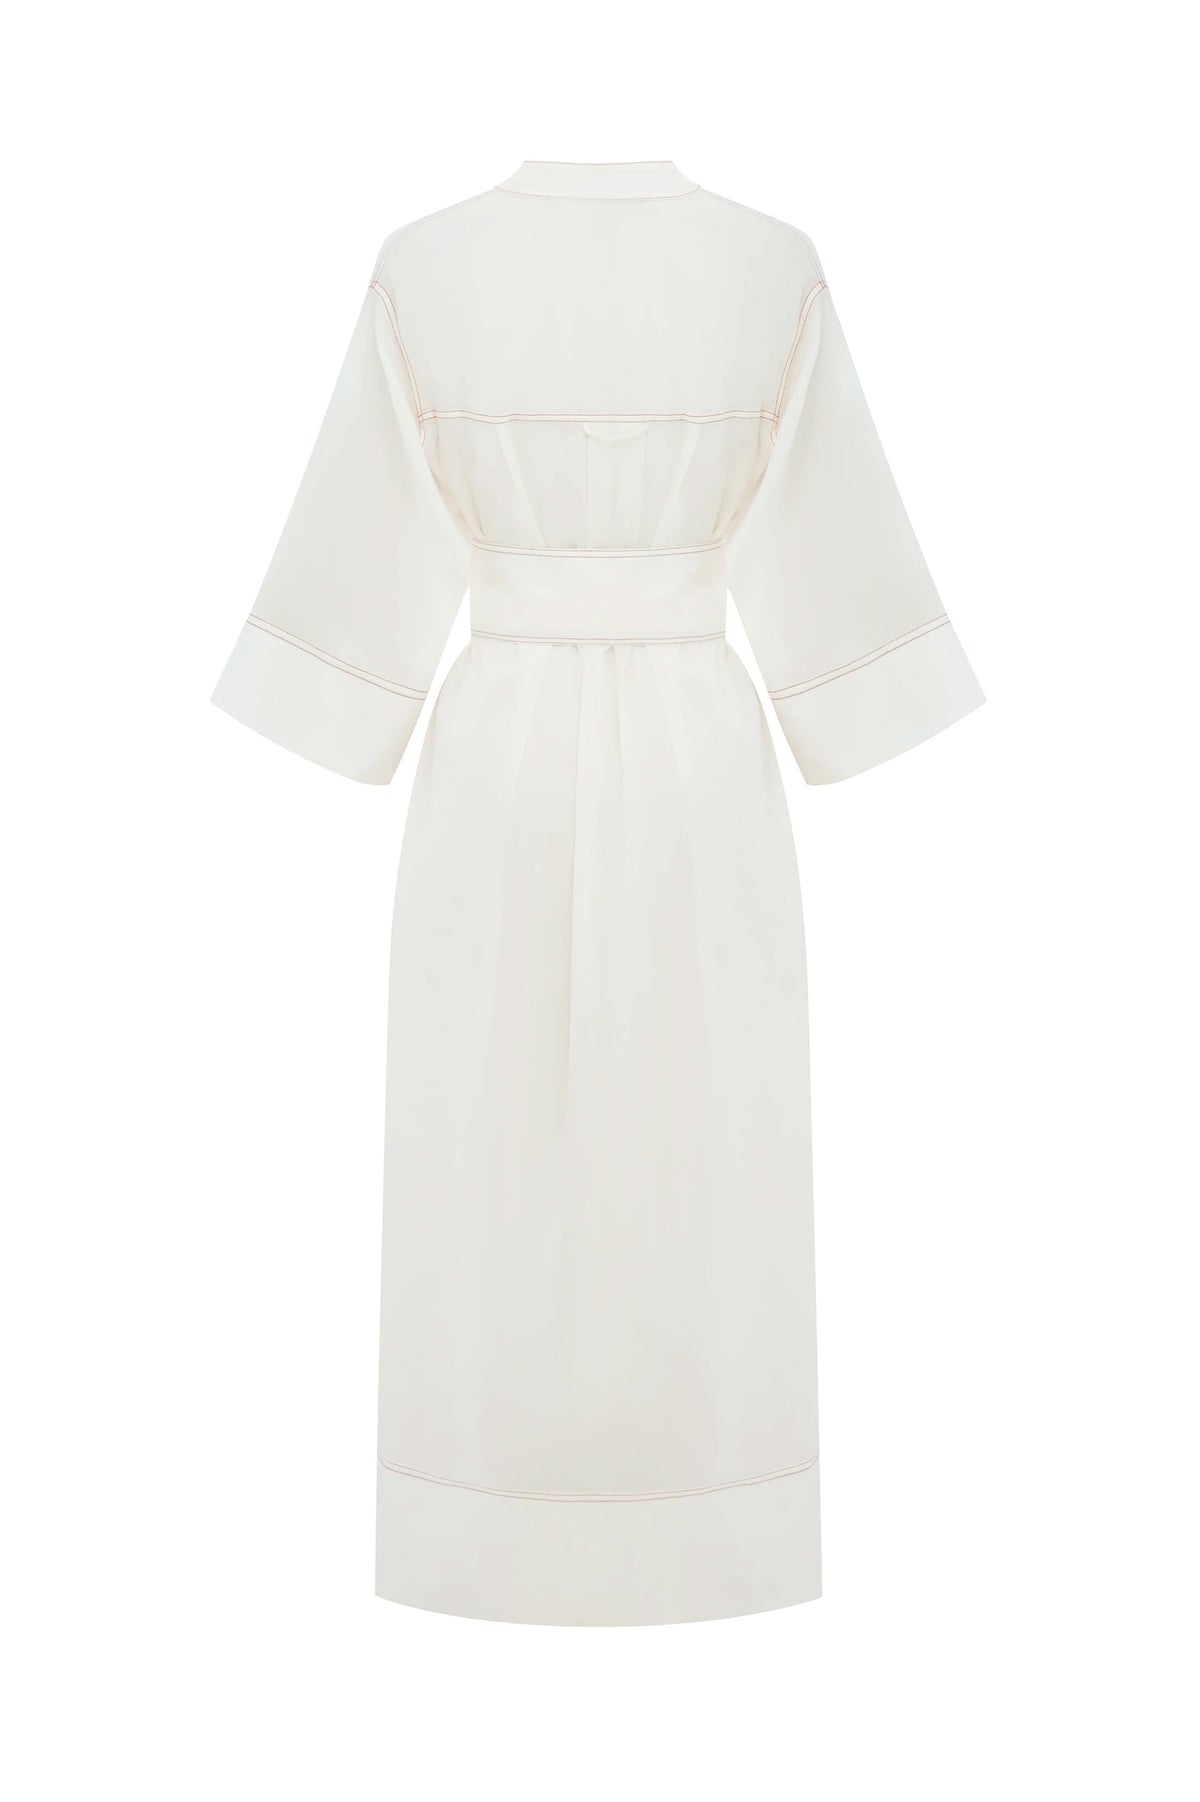 The Ete Dress in Warm Ivory